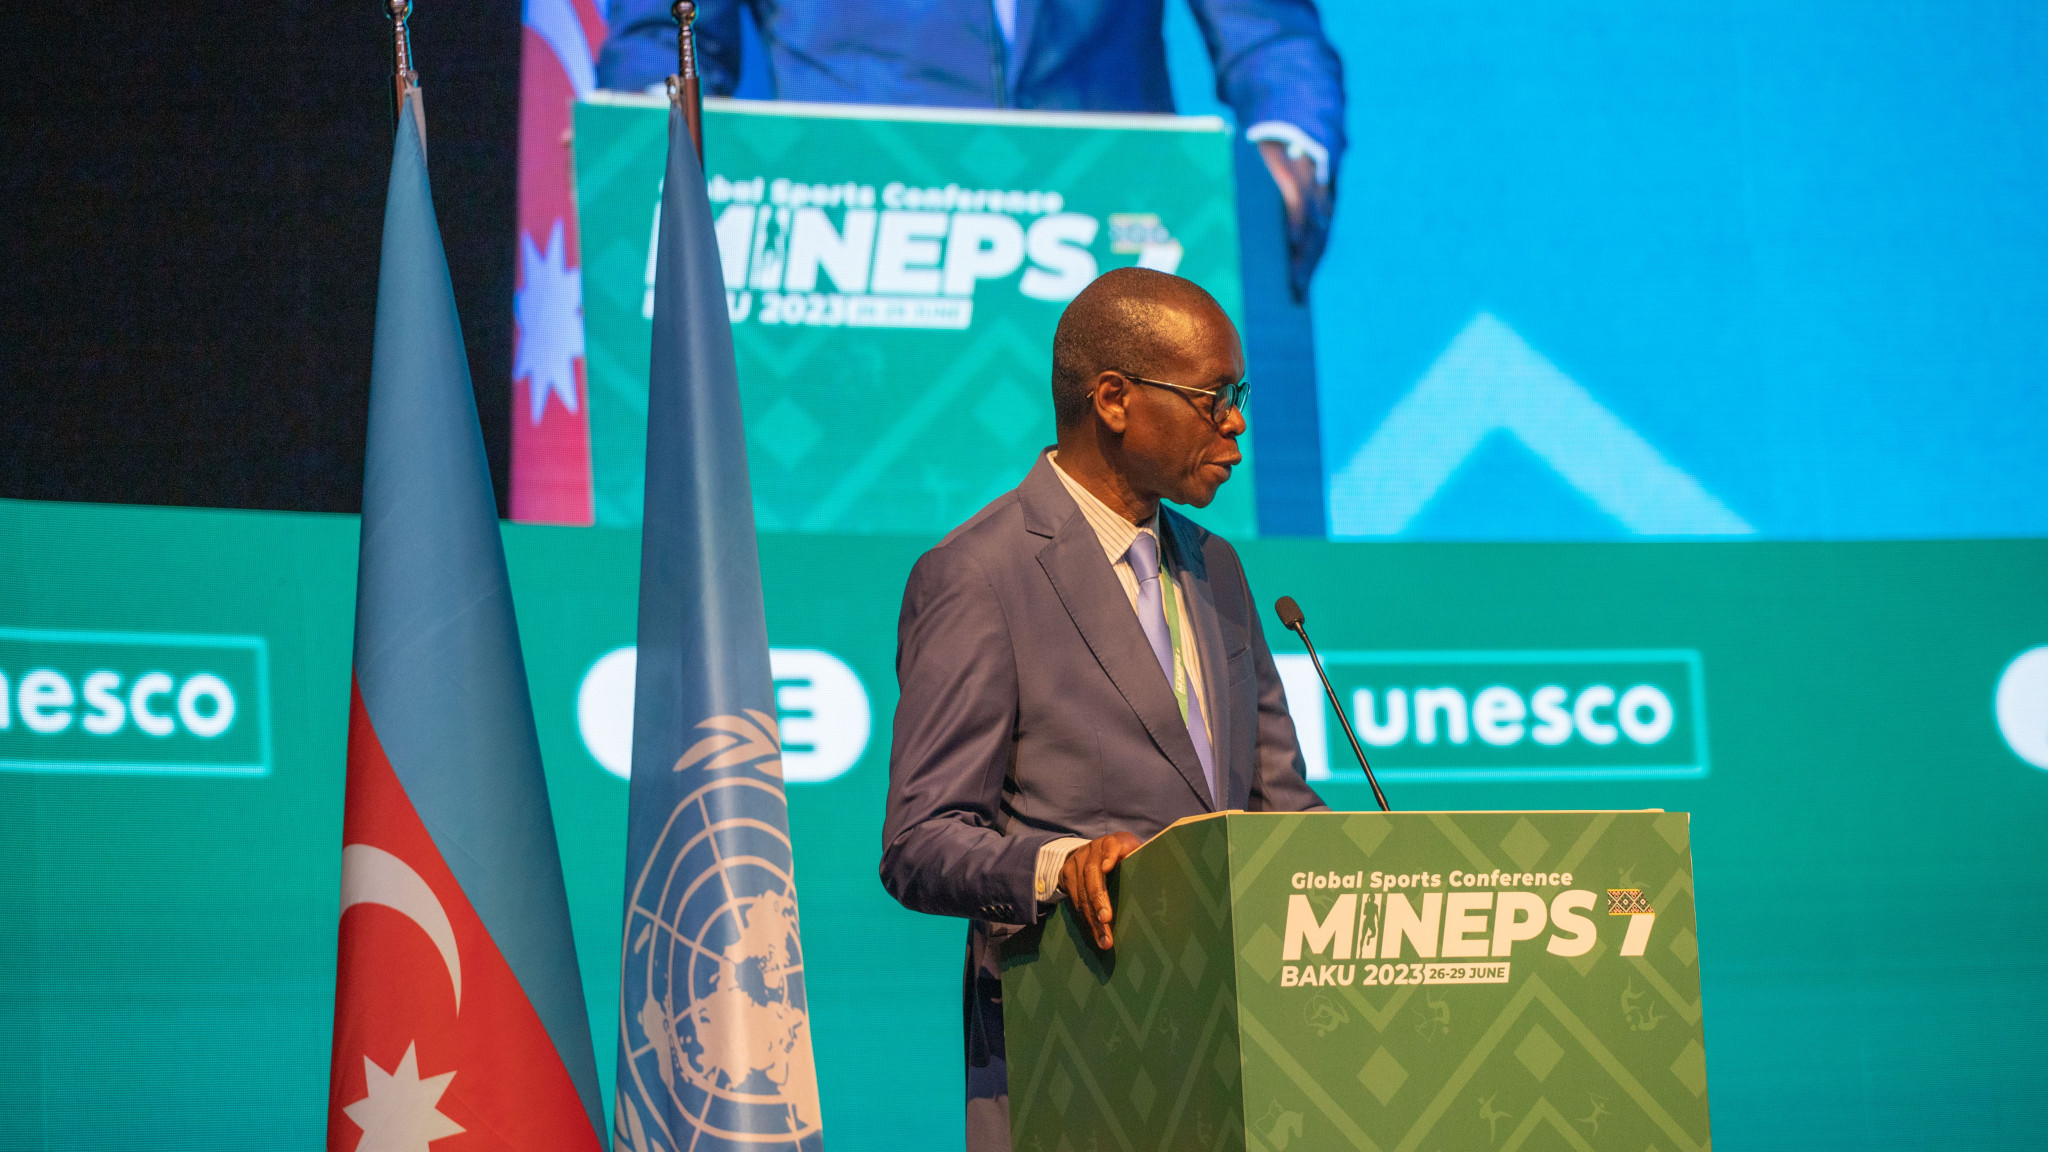 Epiphane Zoro Ballo, Minister for the Promotion of Good Governance, Capacity Building and the Fight against Corruption for Ivory Coast, gave a speech ©MINEPS VII